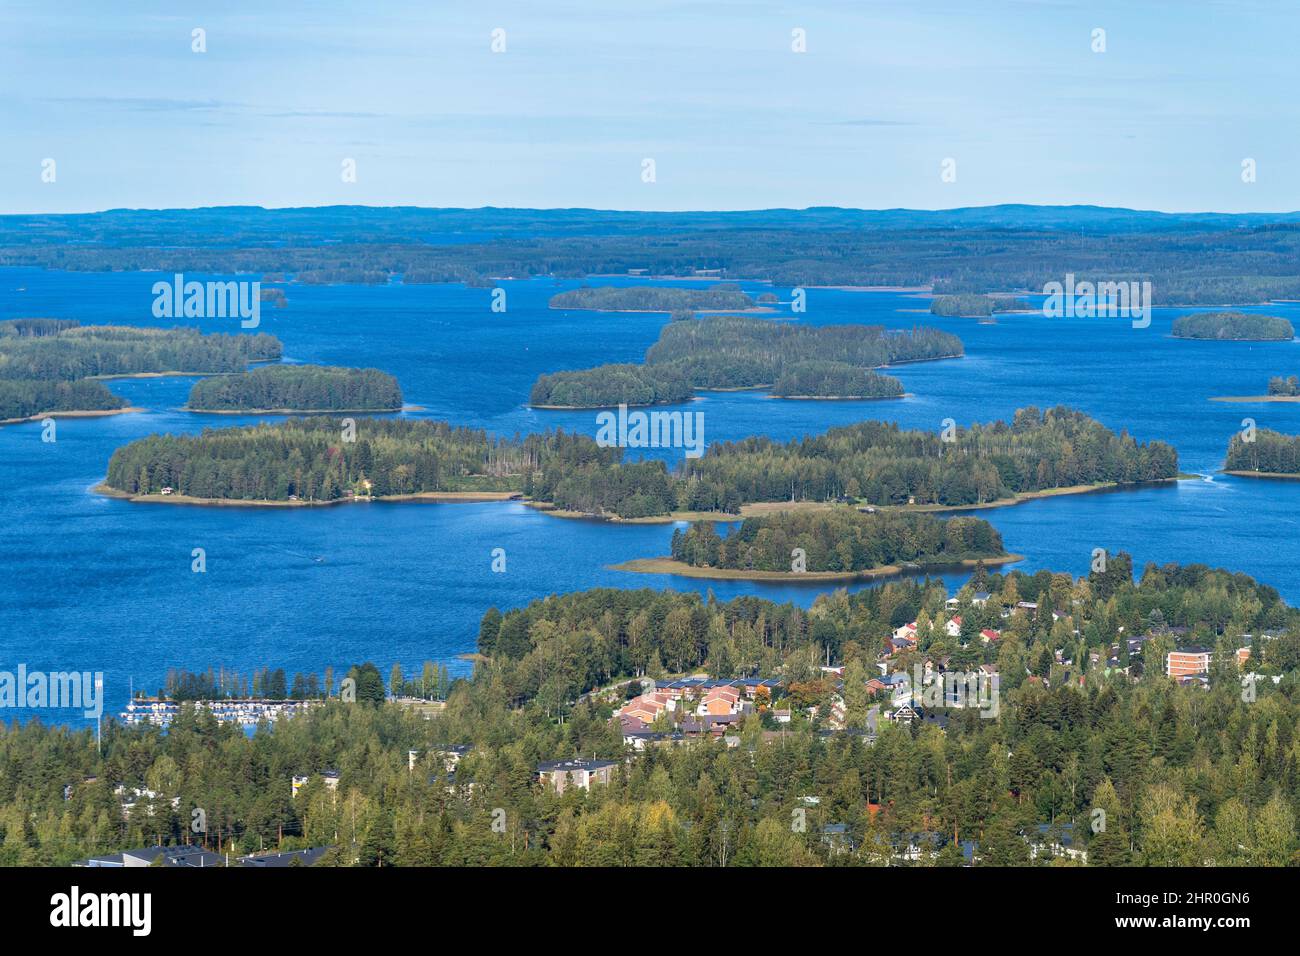 Landscape of lakes and forests seen from Puijo Tower, Kuopio, Finland Stock Photo